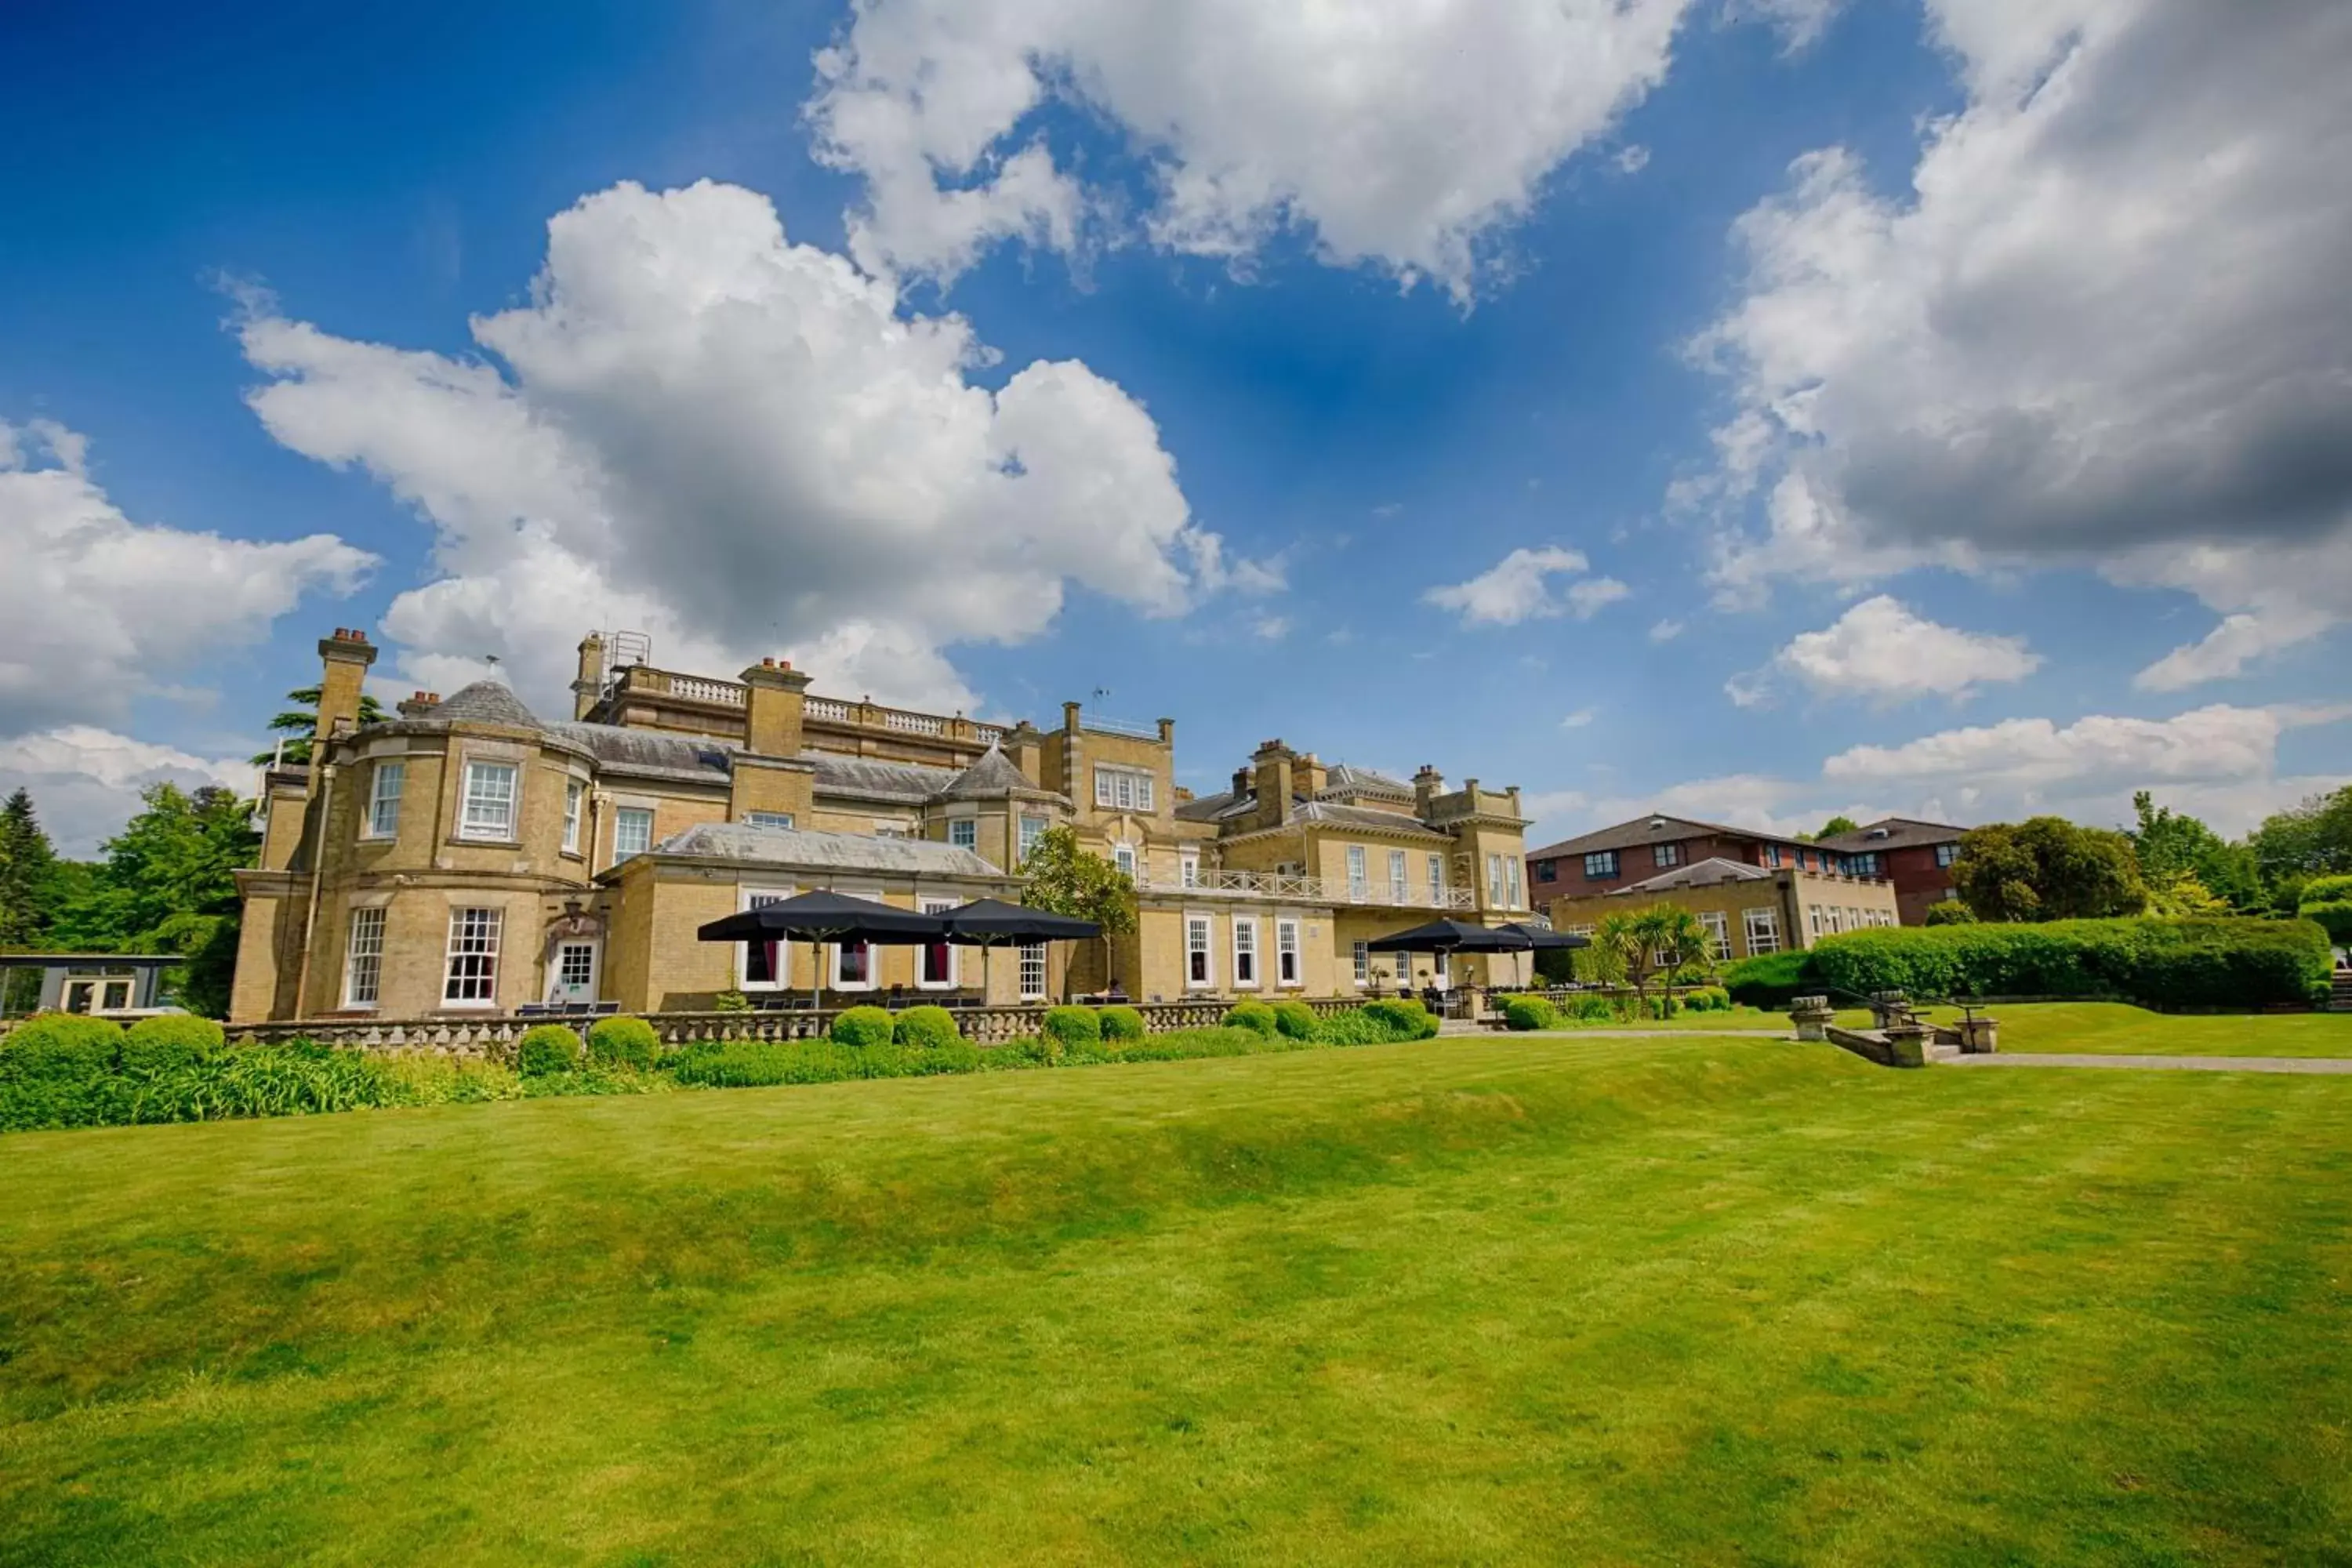 Property Building in Best Western Chilworth Manor Hotel